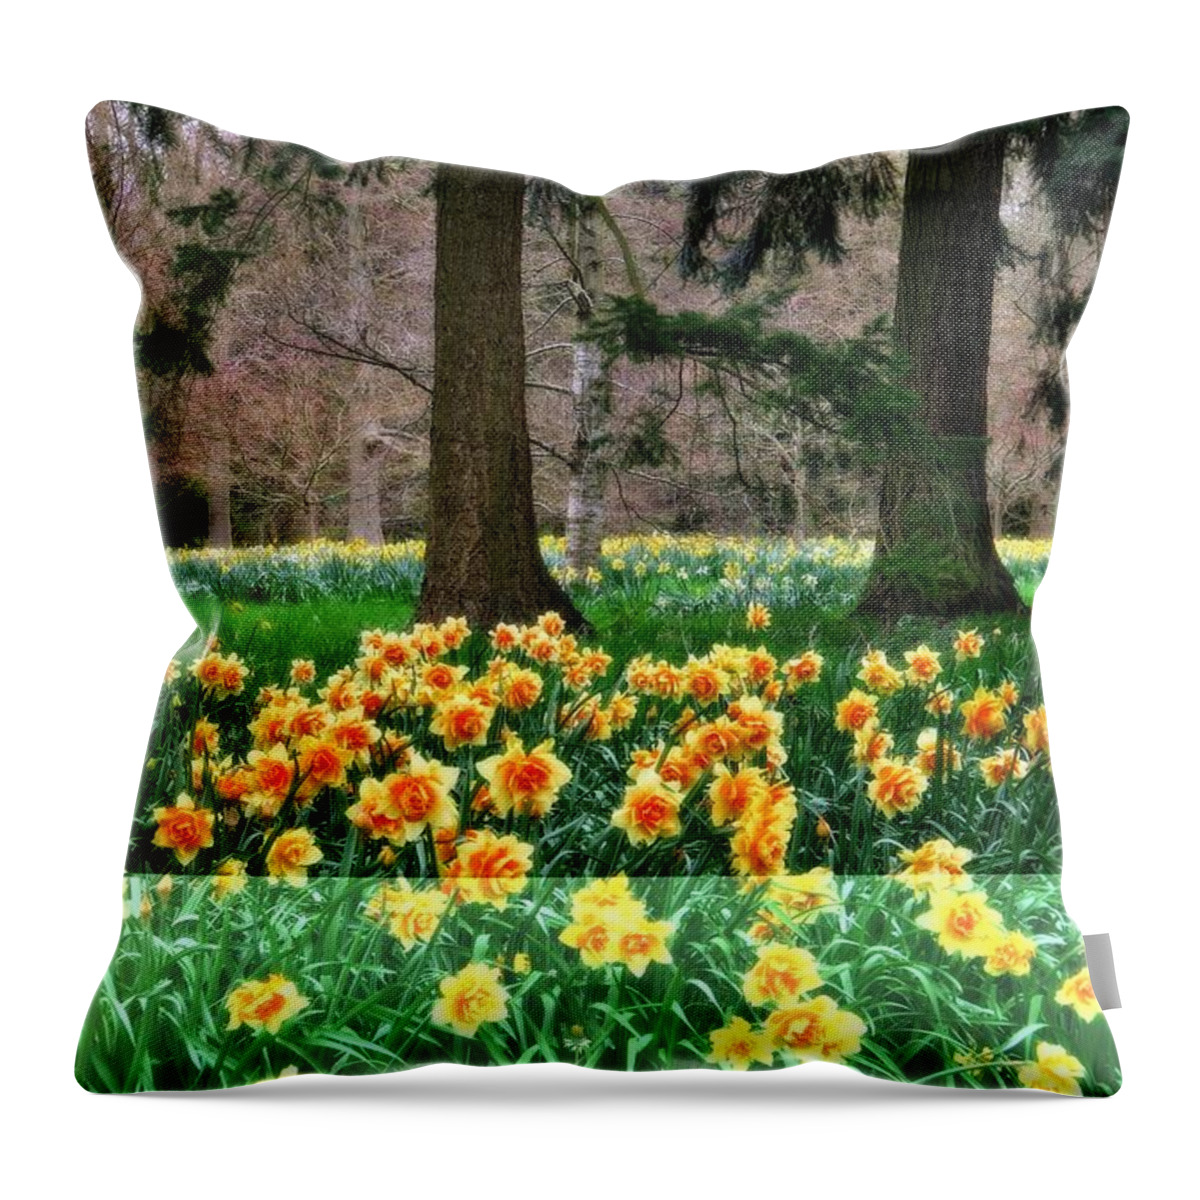 Daffodil Wood Throw Pillow featuring the photograph Spring Woodland Daffodils by Martyn Arnold